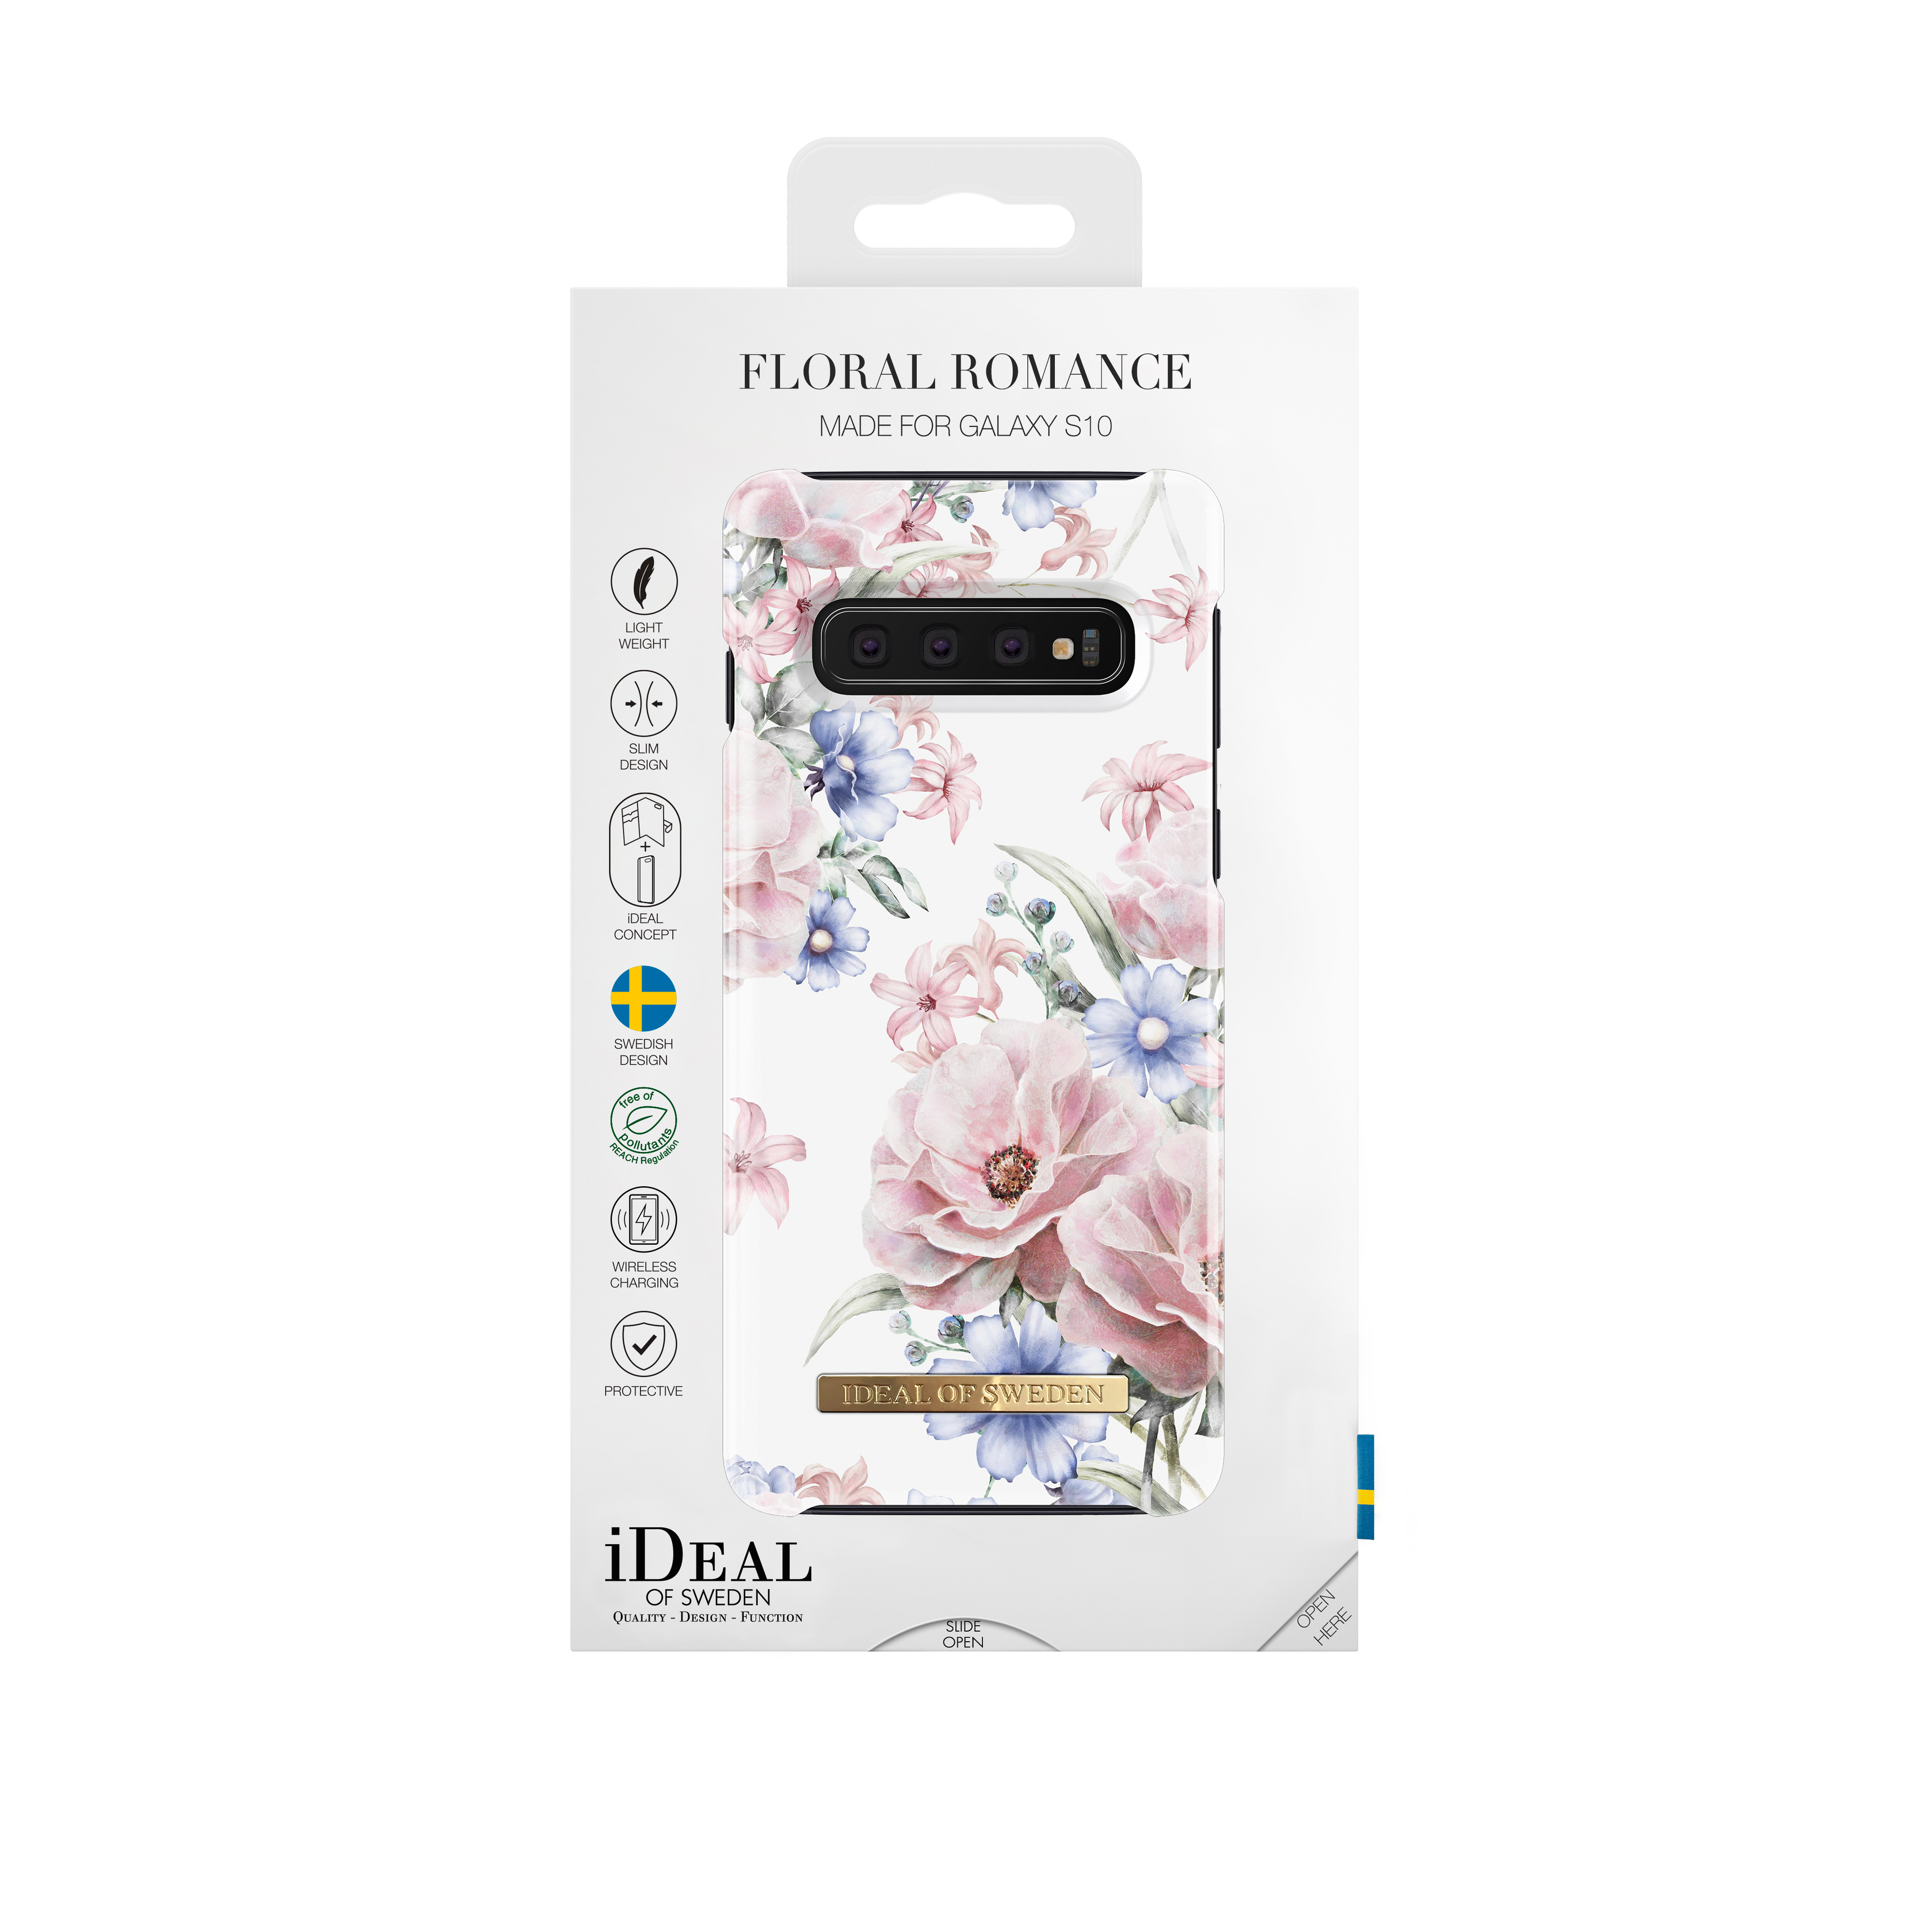 Backcover, Floral Romance SWEDEN Samsung, S10, Galaxy OF IDEAL Fashion,